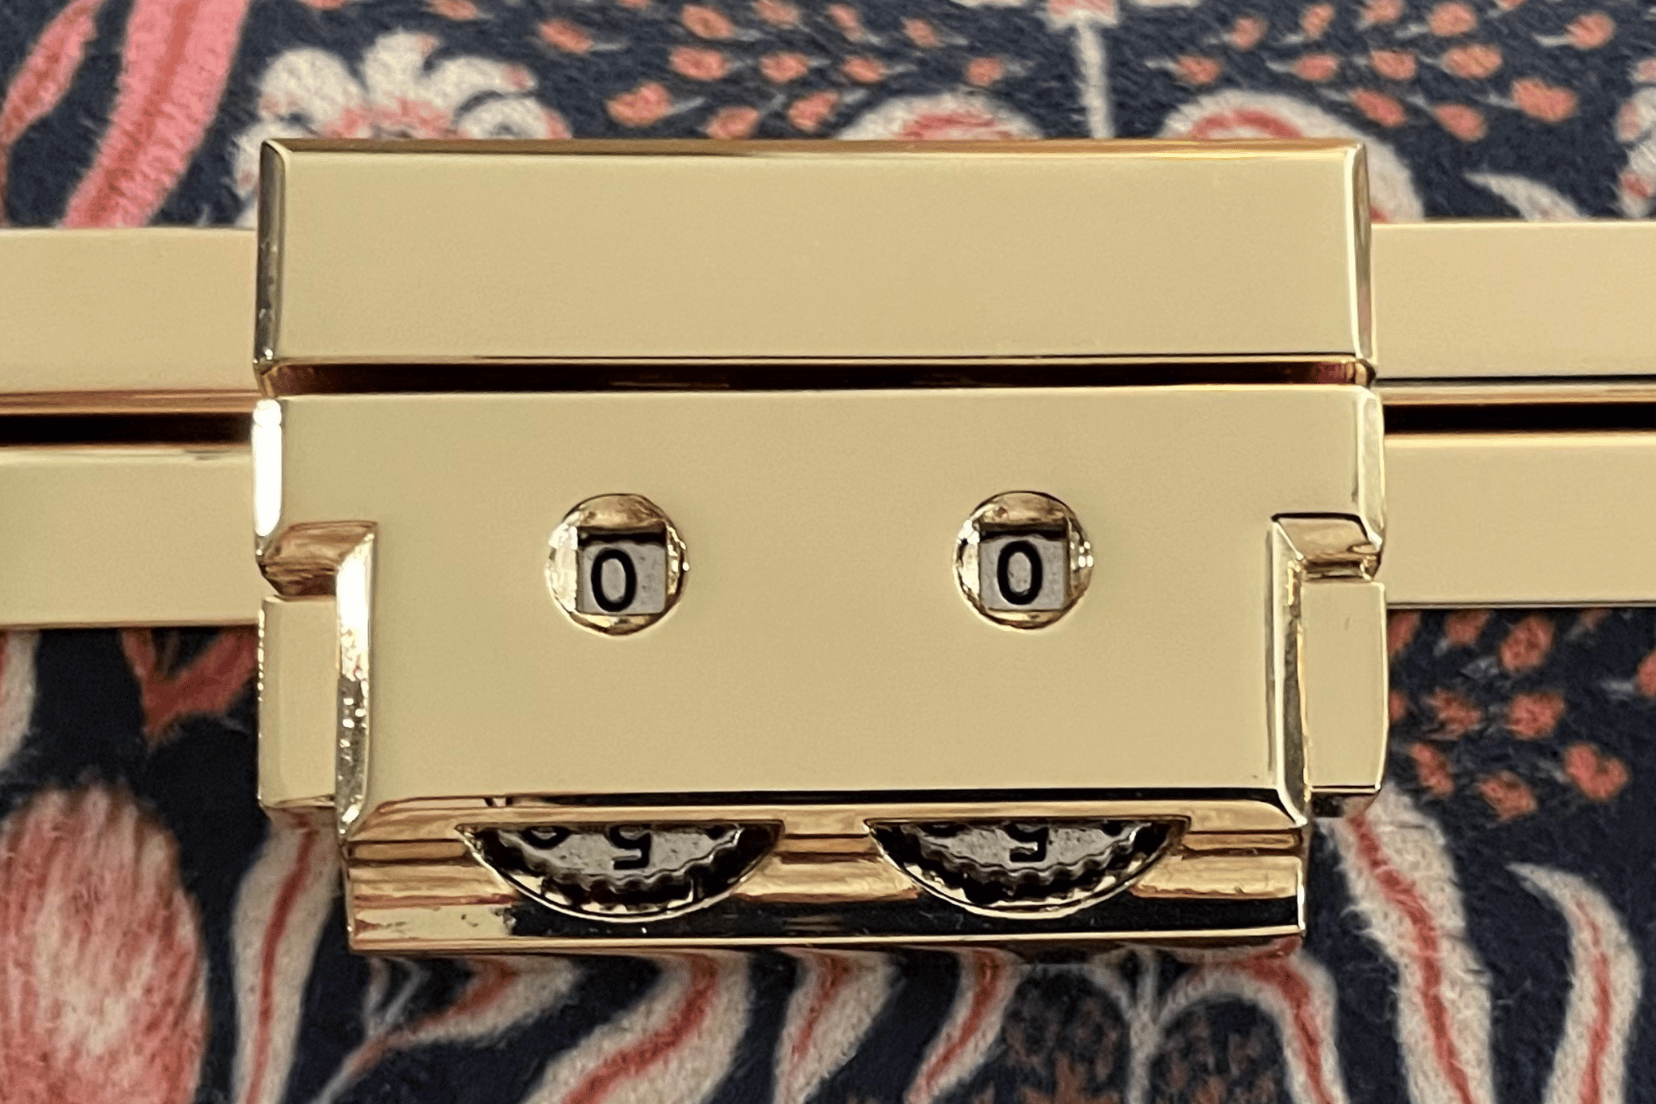 Gold plated dial locks allow you to set the code to your lovely lockbox.